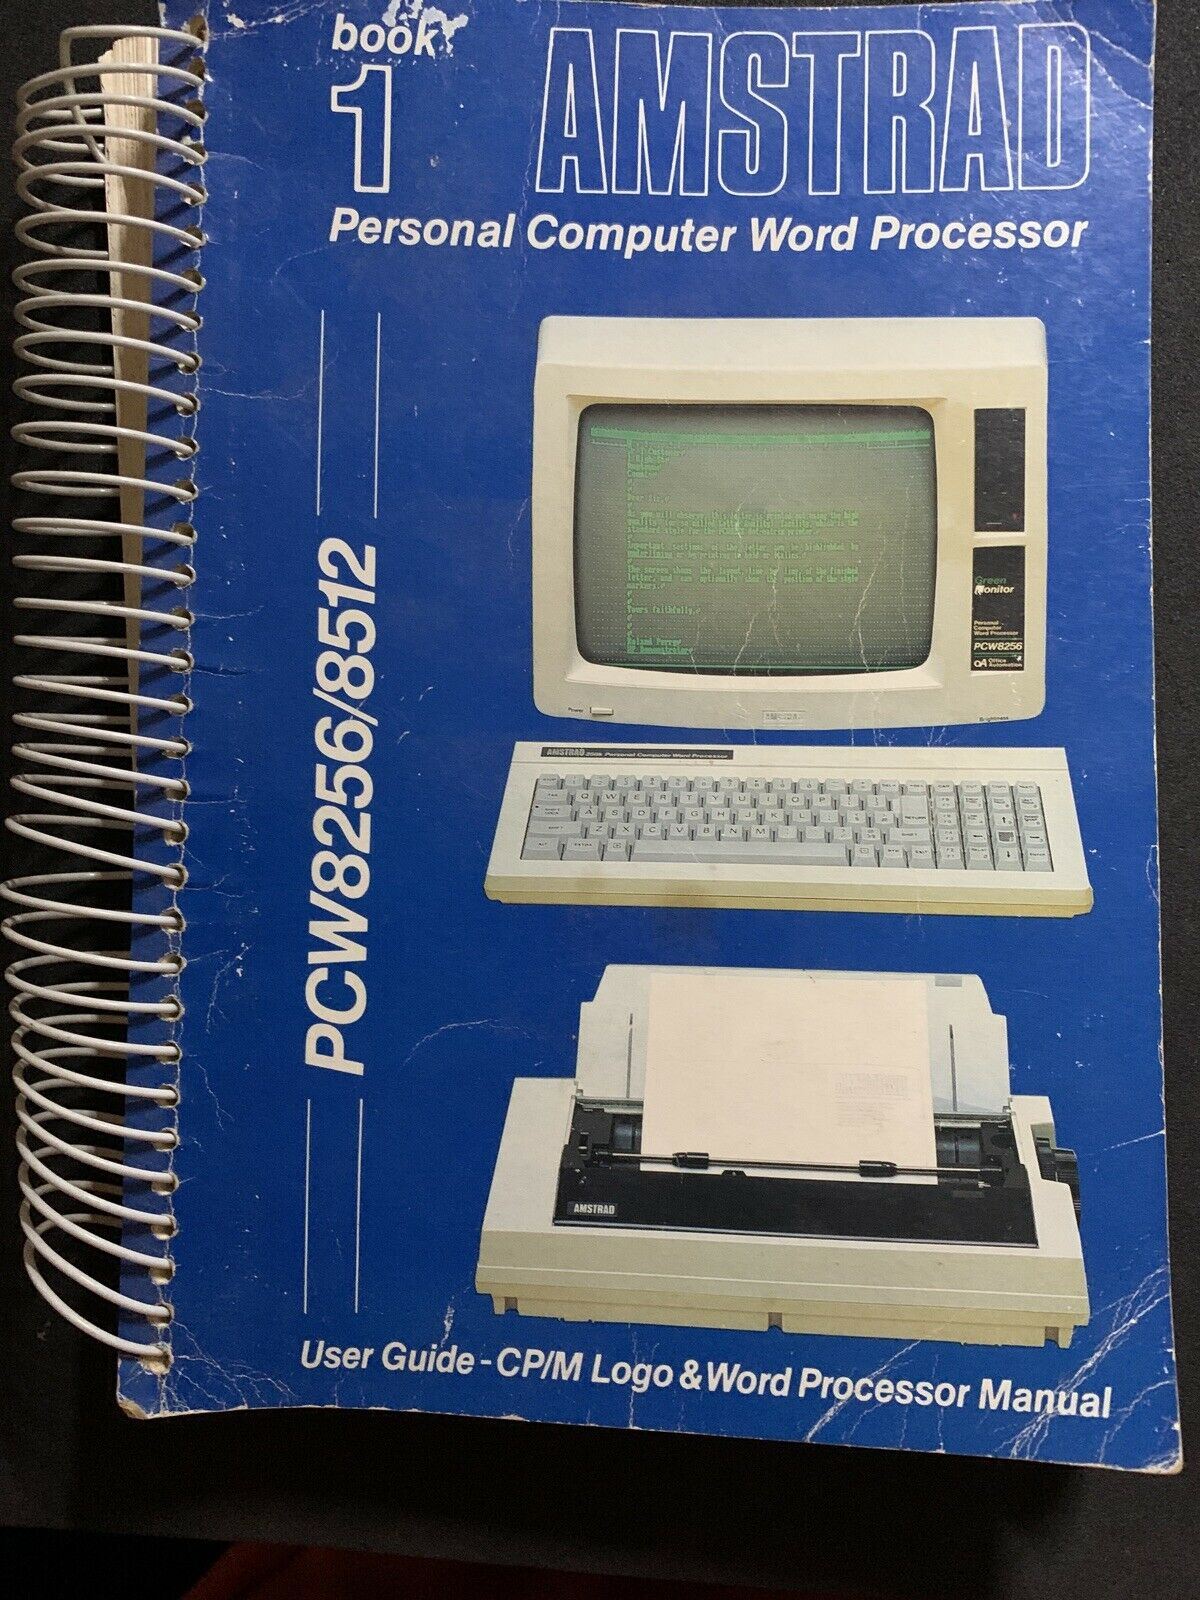 Amstrad PCW8256 Personal Computer Word Processor Book 1 & 2 - User Guide & BASIC